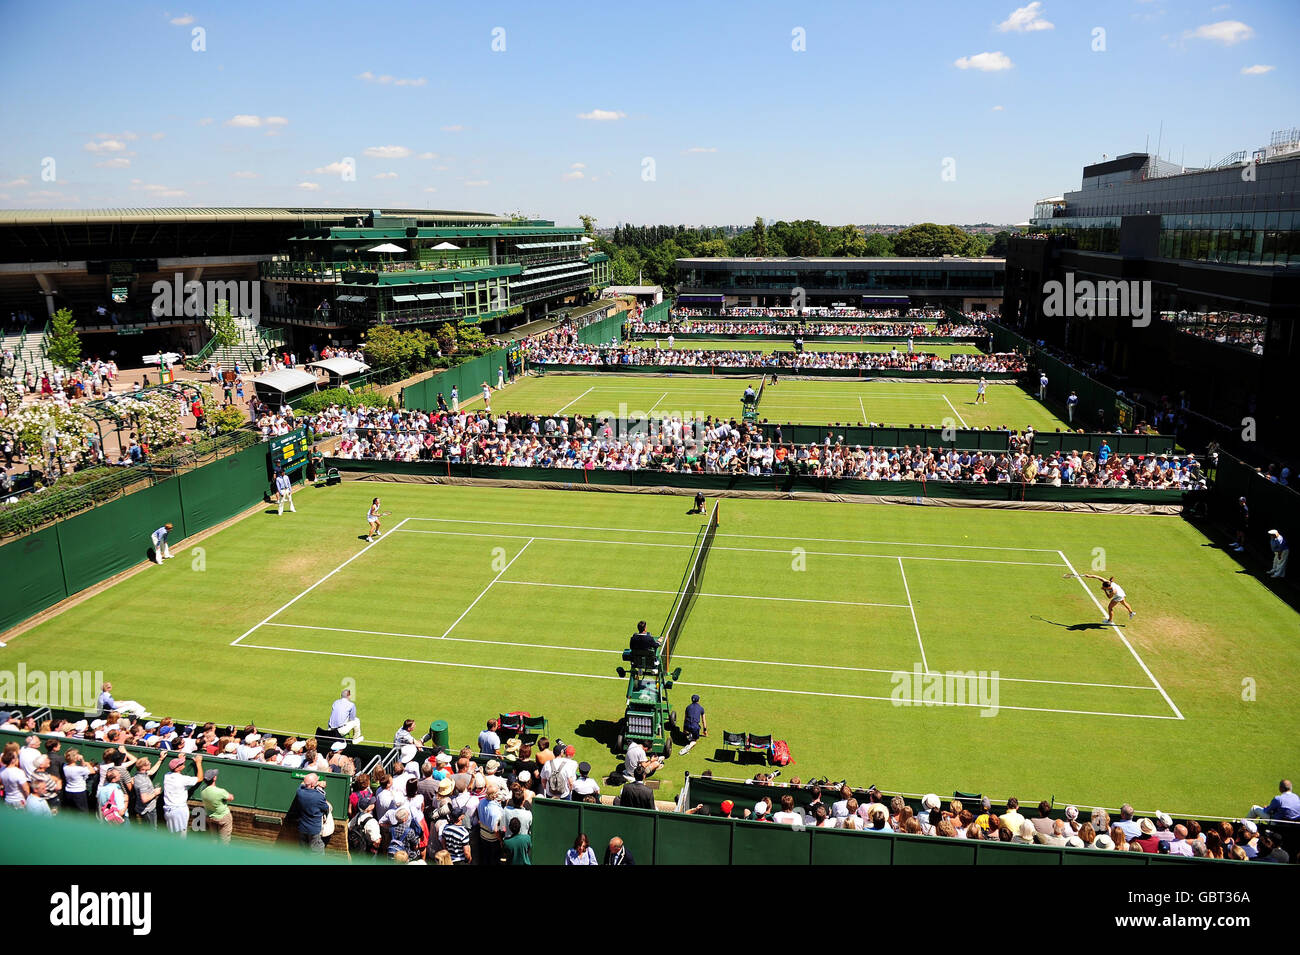 Courts 14, 15, 16 and 17 are seen between Court One (left) and Centre Court during the 2009 Wimbledon Championships at the All England Lawn Tennis and Croquet Club, Wimbledon, London. Stock Photo